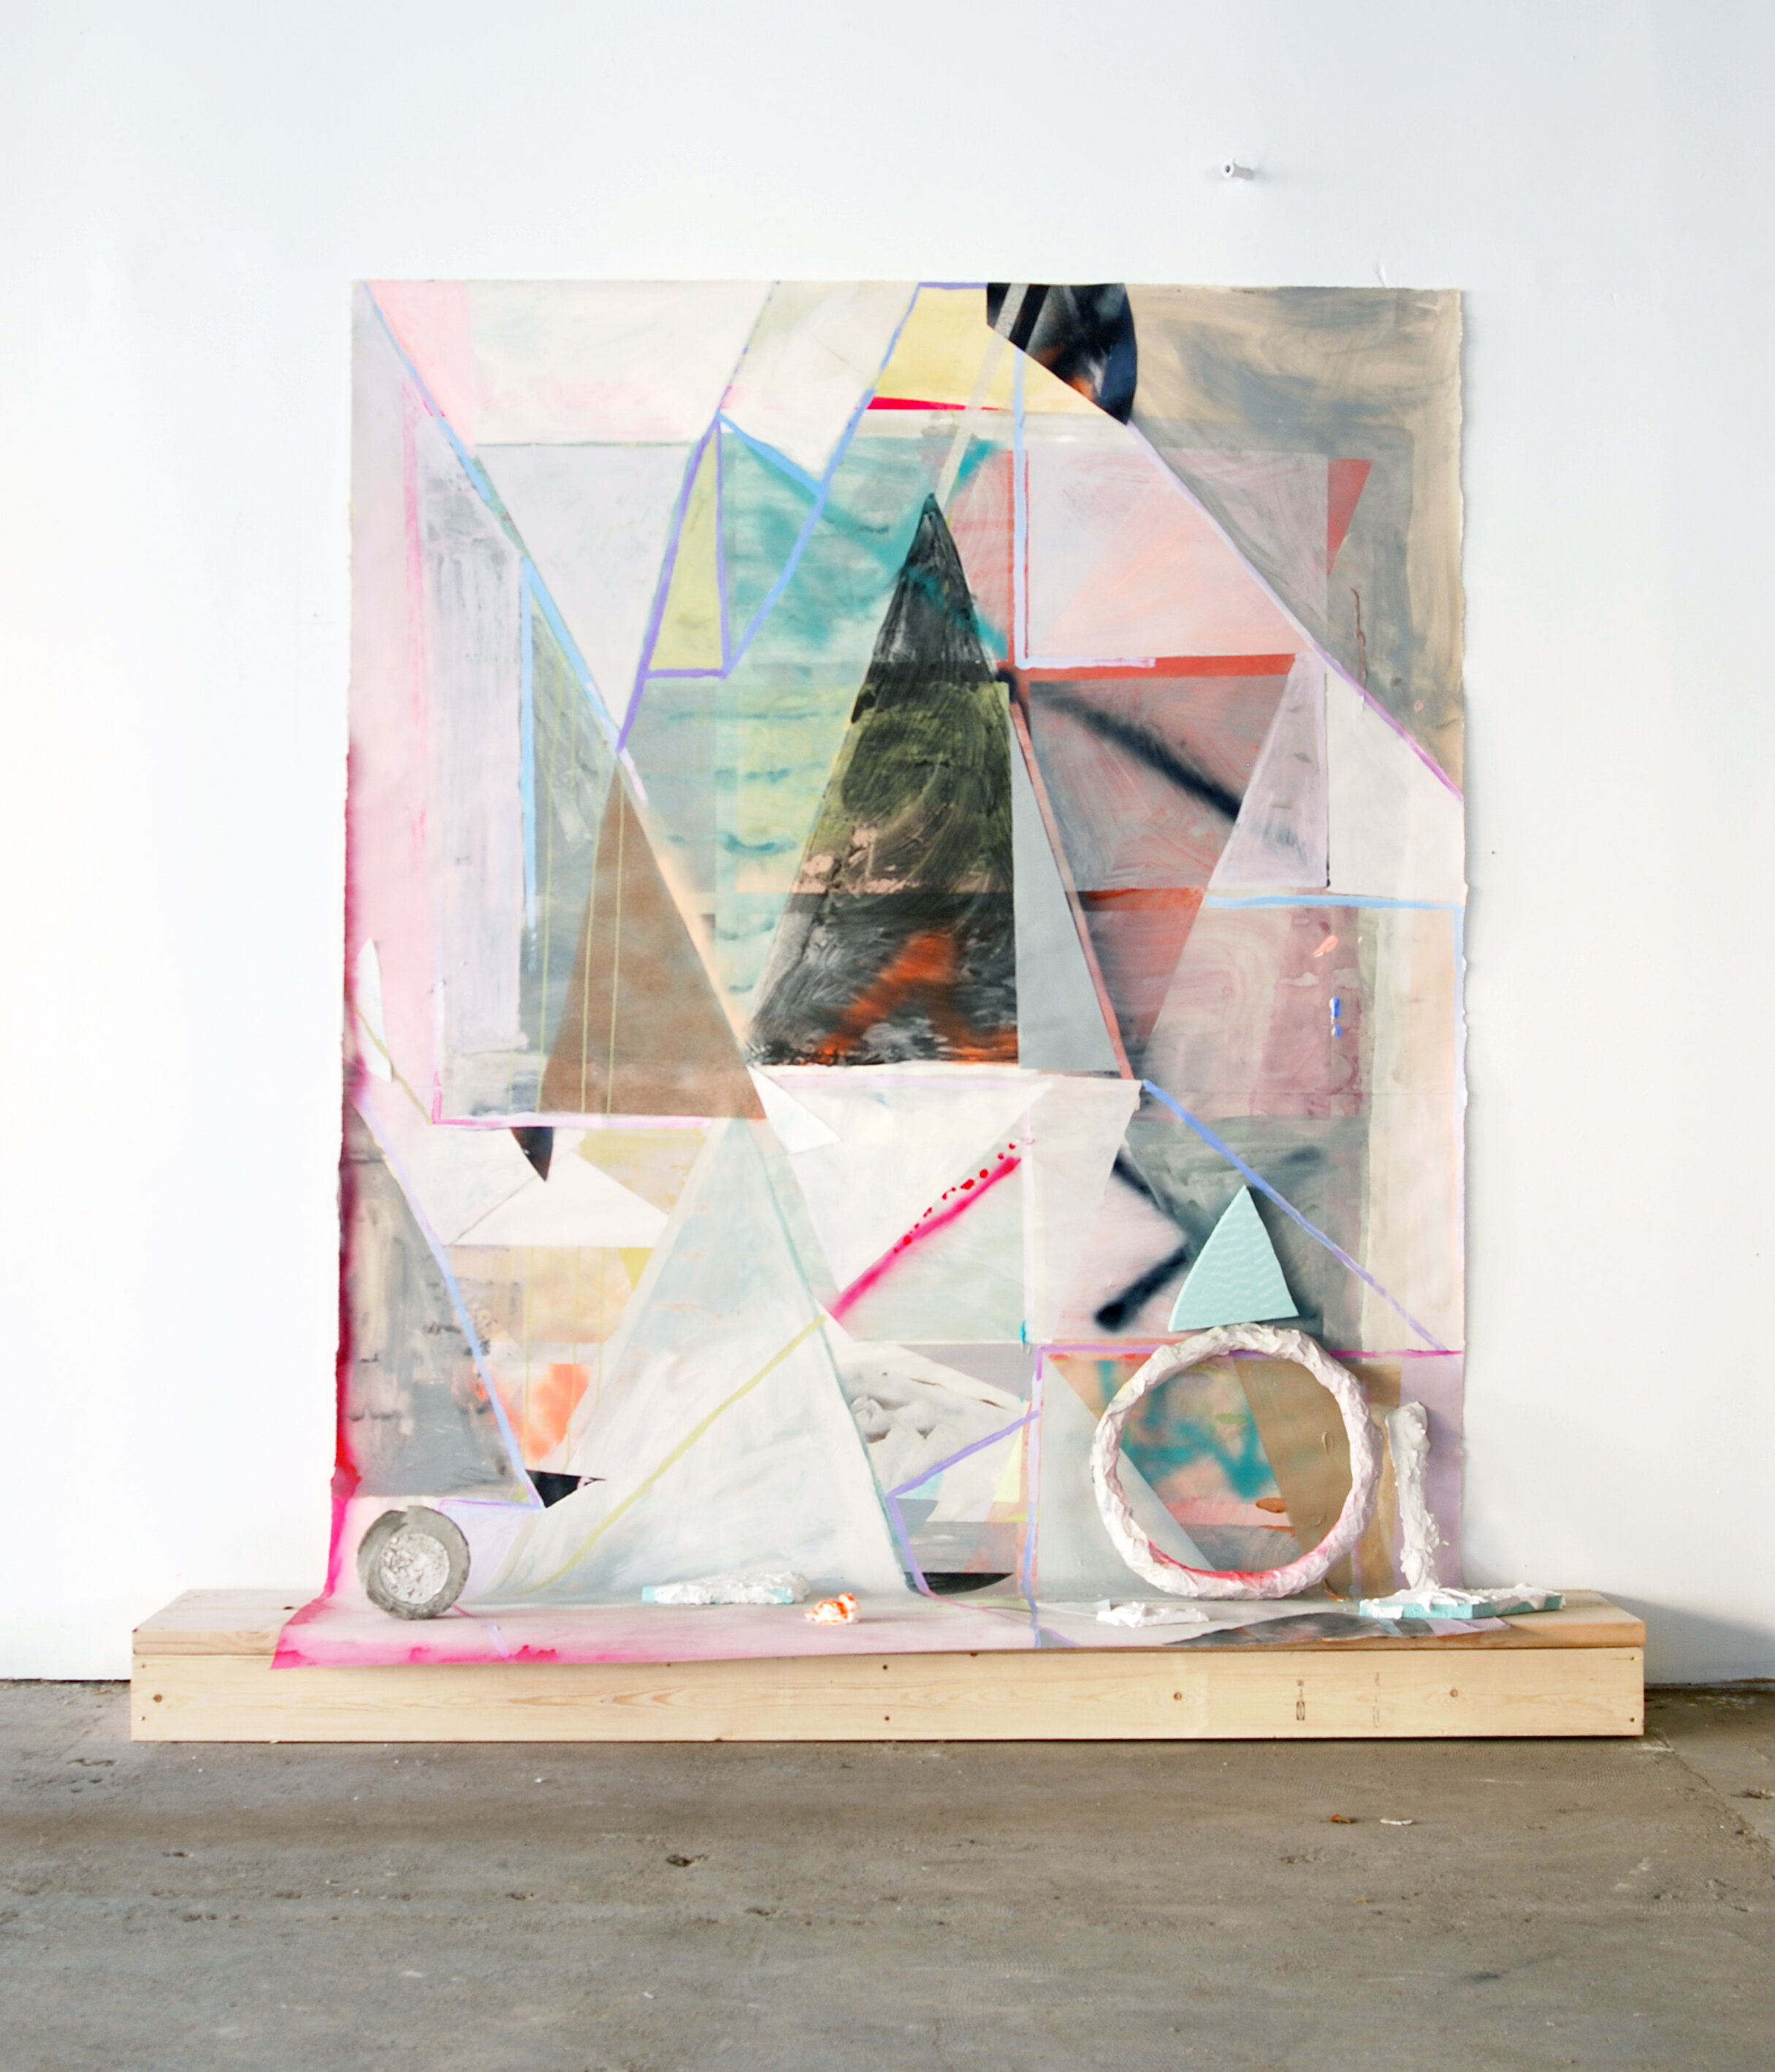   Poor Pythagoras , 2014 Latex, gouache, acrylic, spray paint, image transfers and collage on paper, wood, foam, paper mache, plaster and cement 120 x 84 x 24 inches  